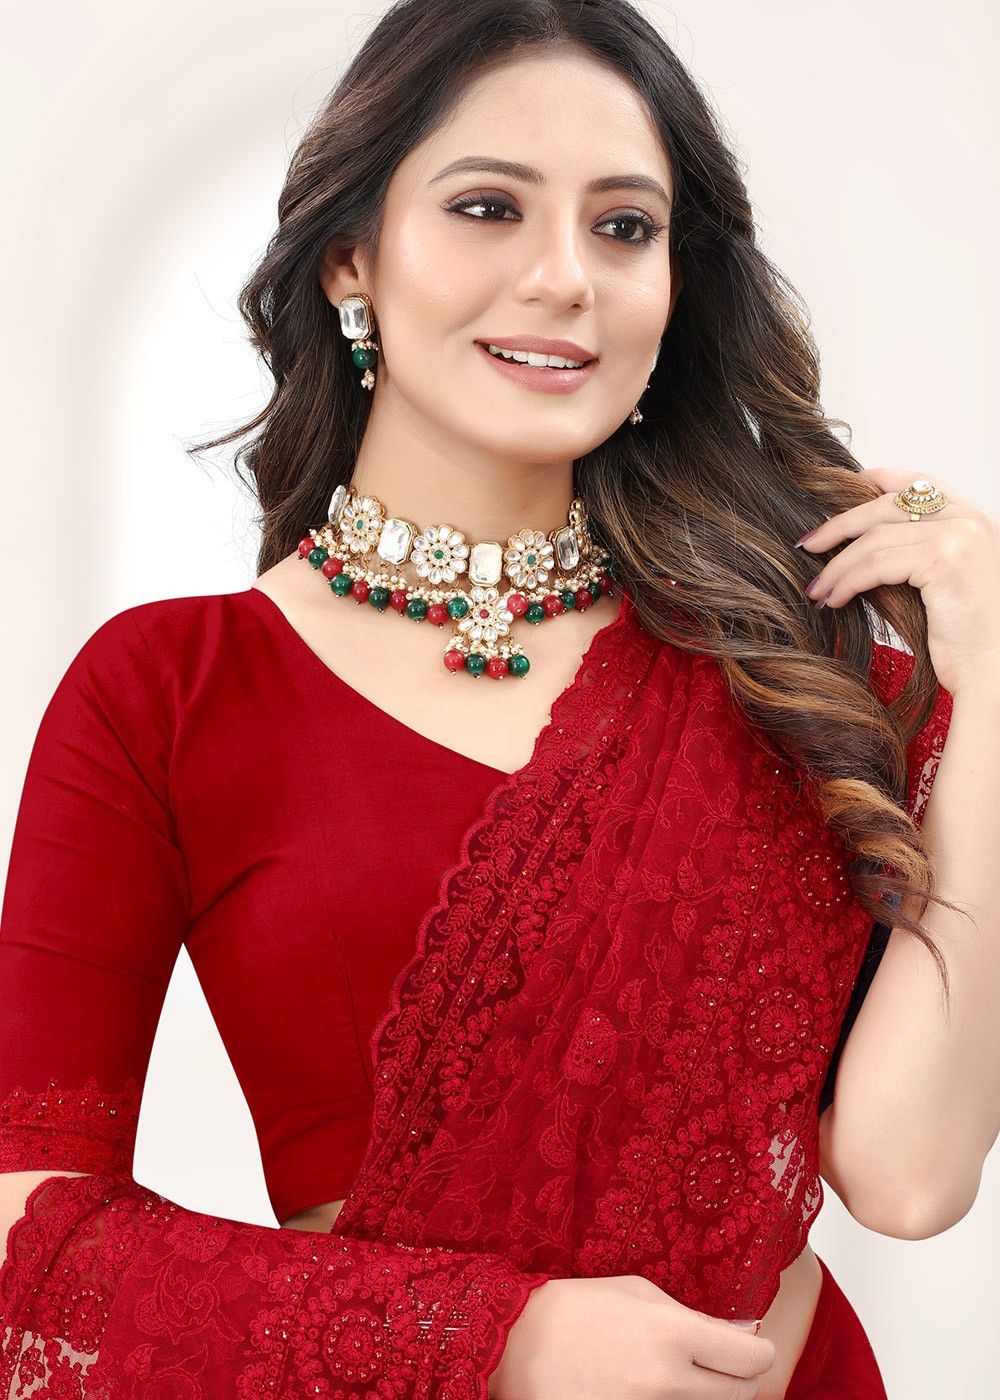 Red Net Saree With Resham Embroidery 4358SR02